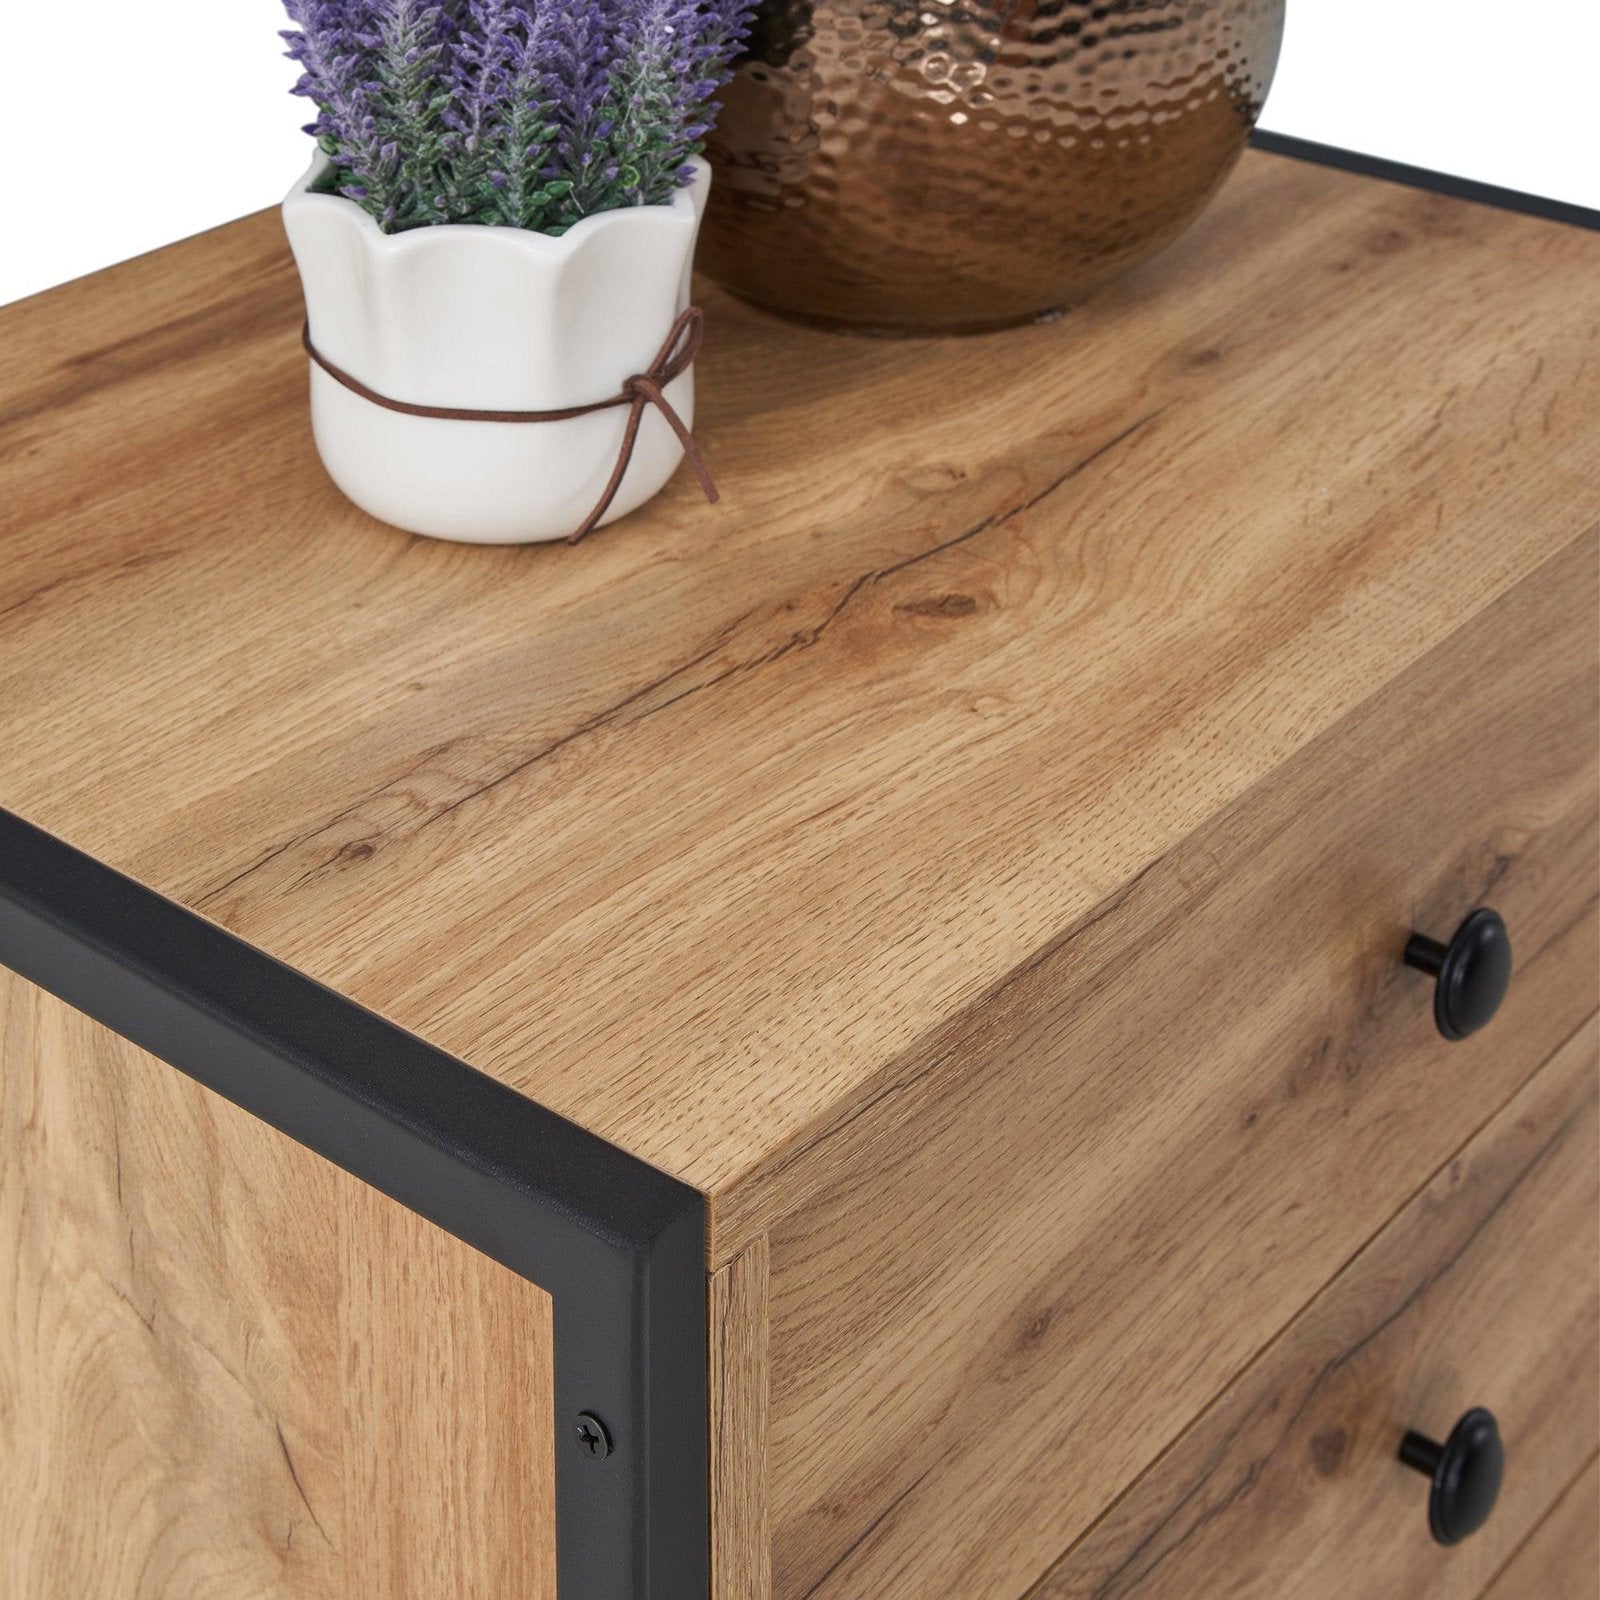 Zahra Nightstand Drawers allhomely